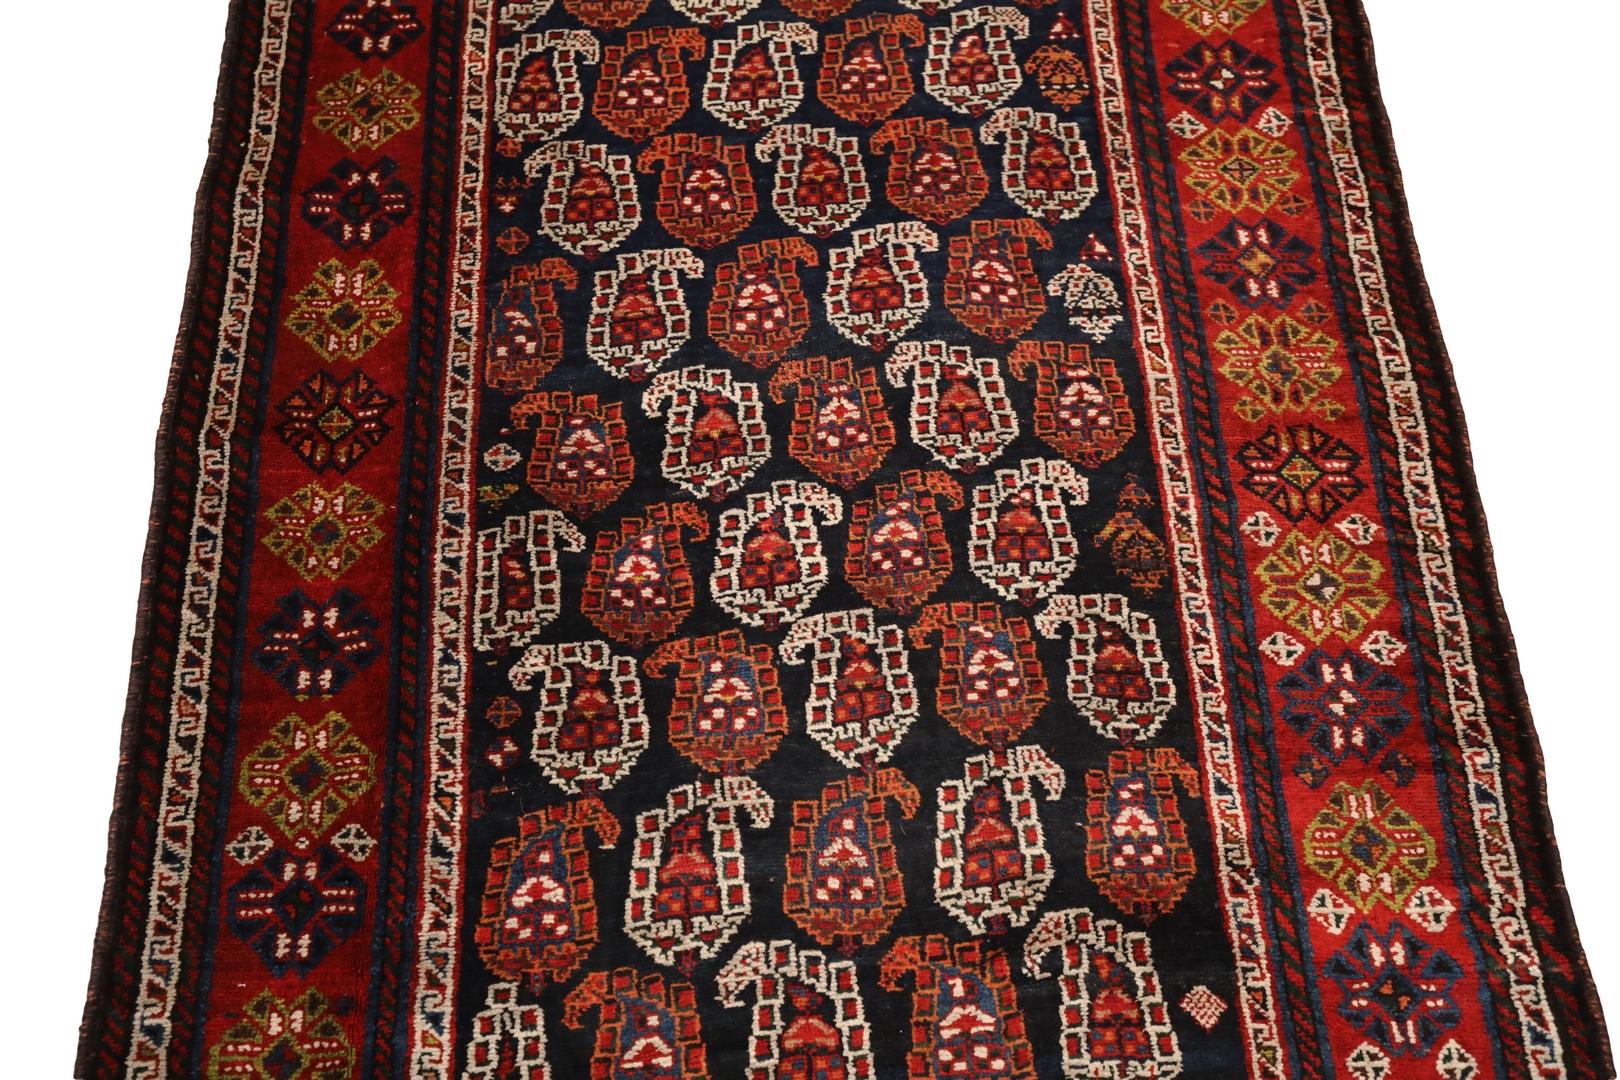 Hand-Knotted Qashqai Antique Runner - 3'11